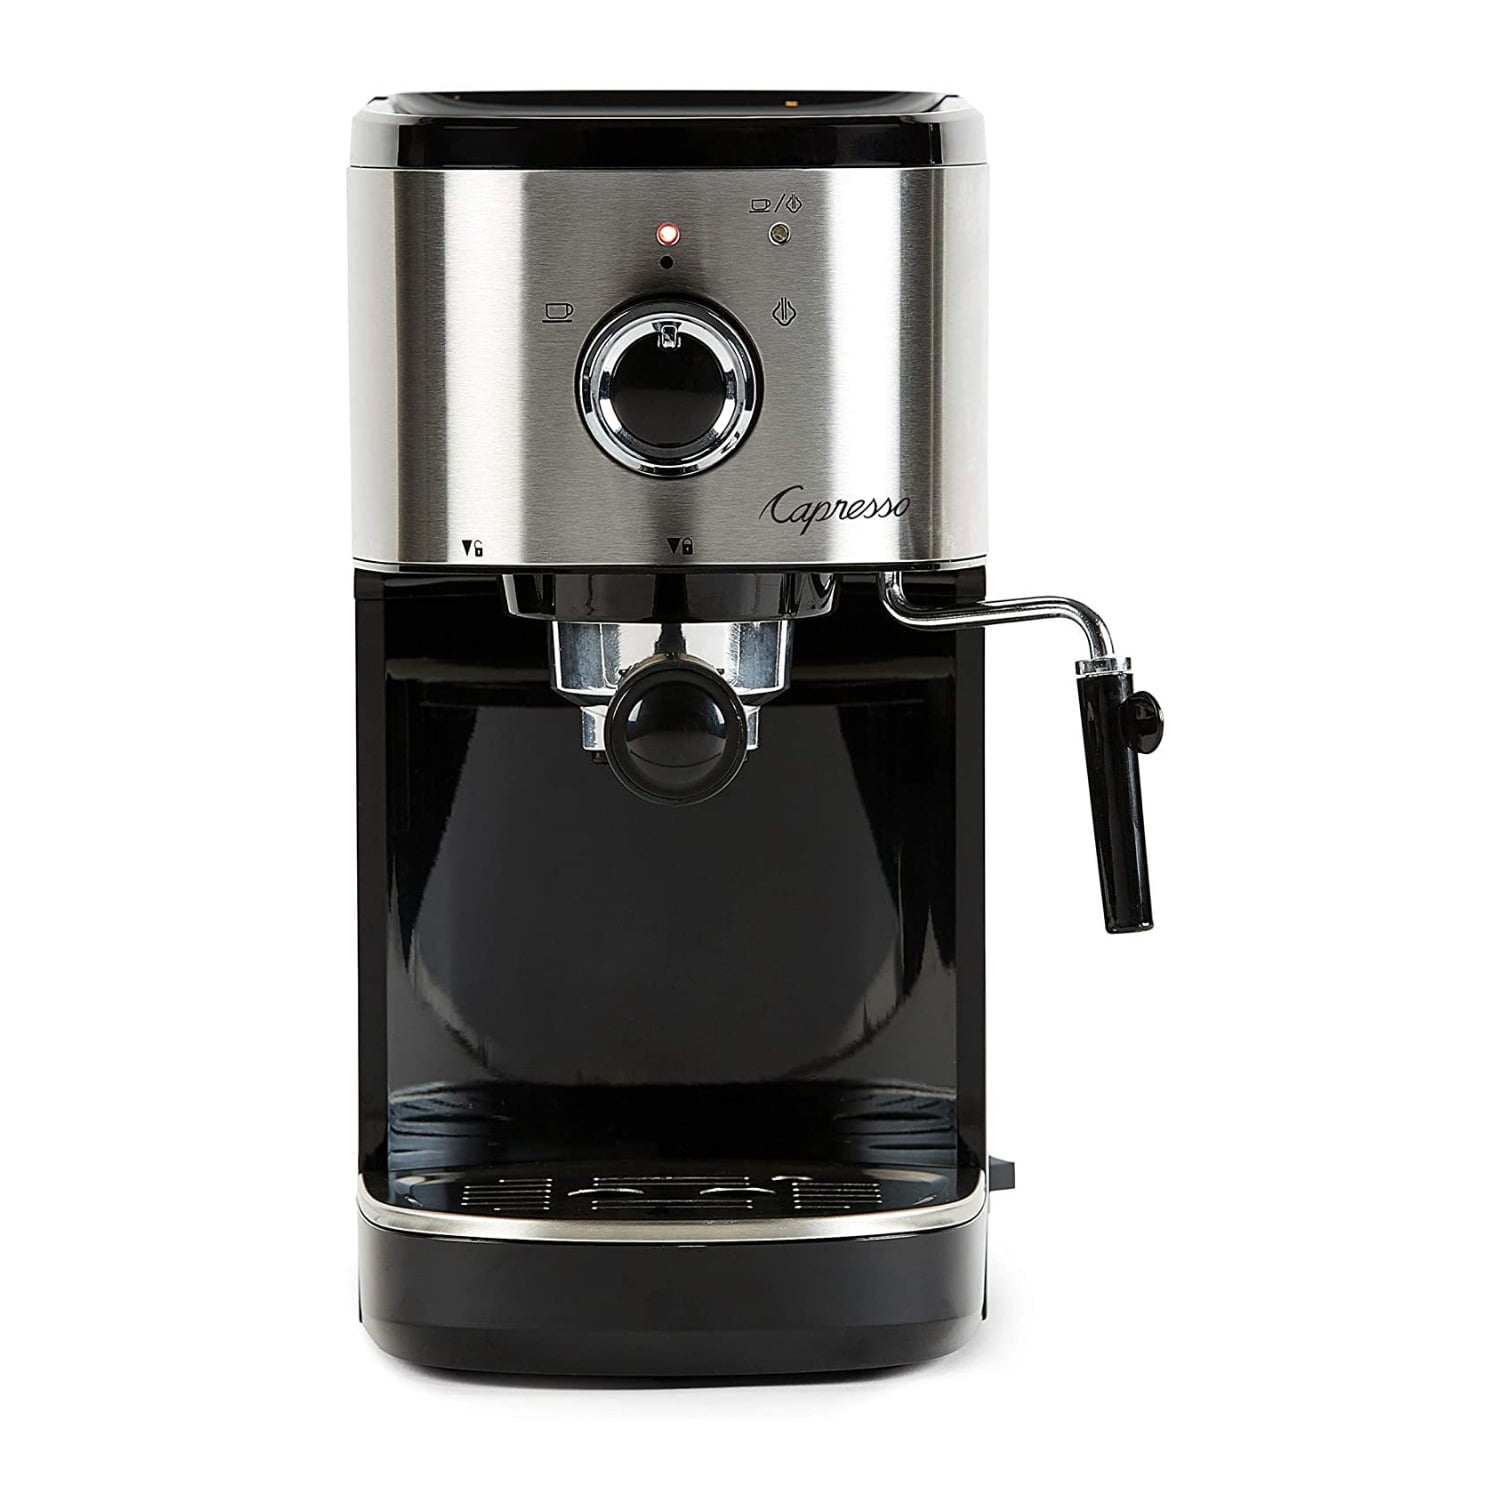 Capresso 117.05 Stainless Steel Pump Espresso and Cappuccino Machine EC50 Black/Stainless 